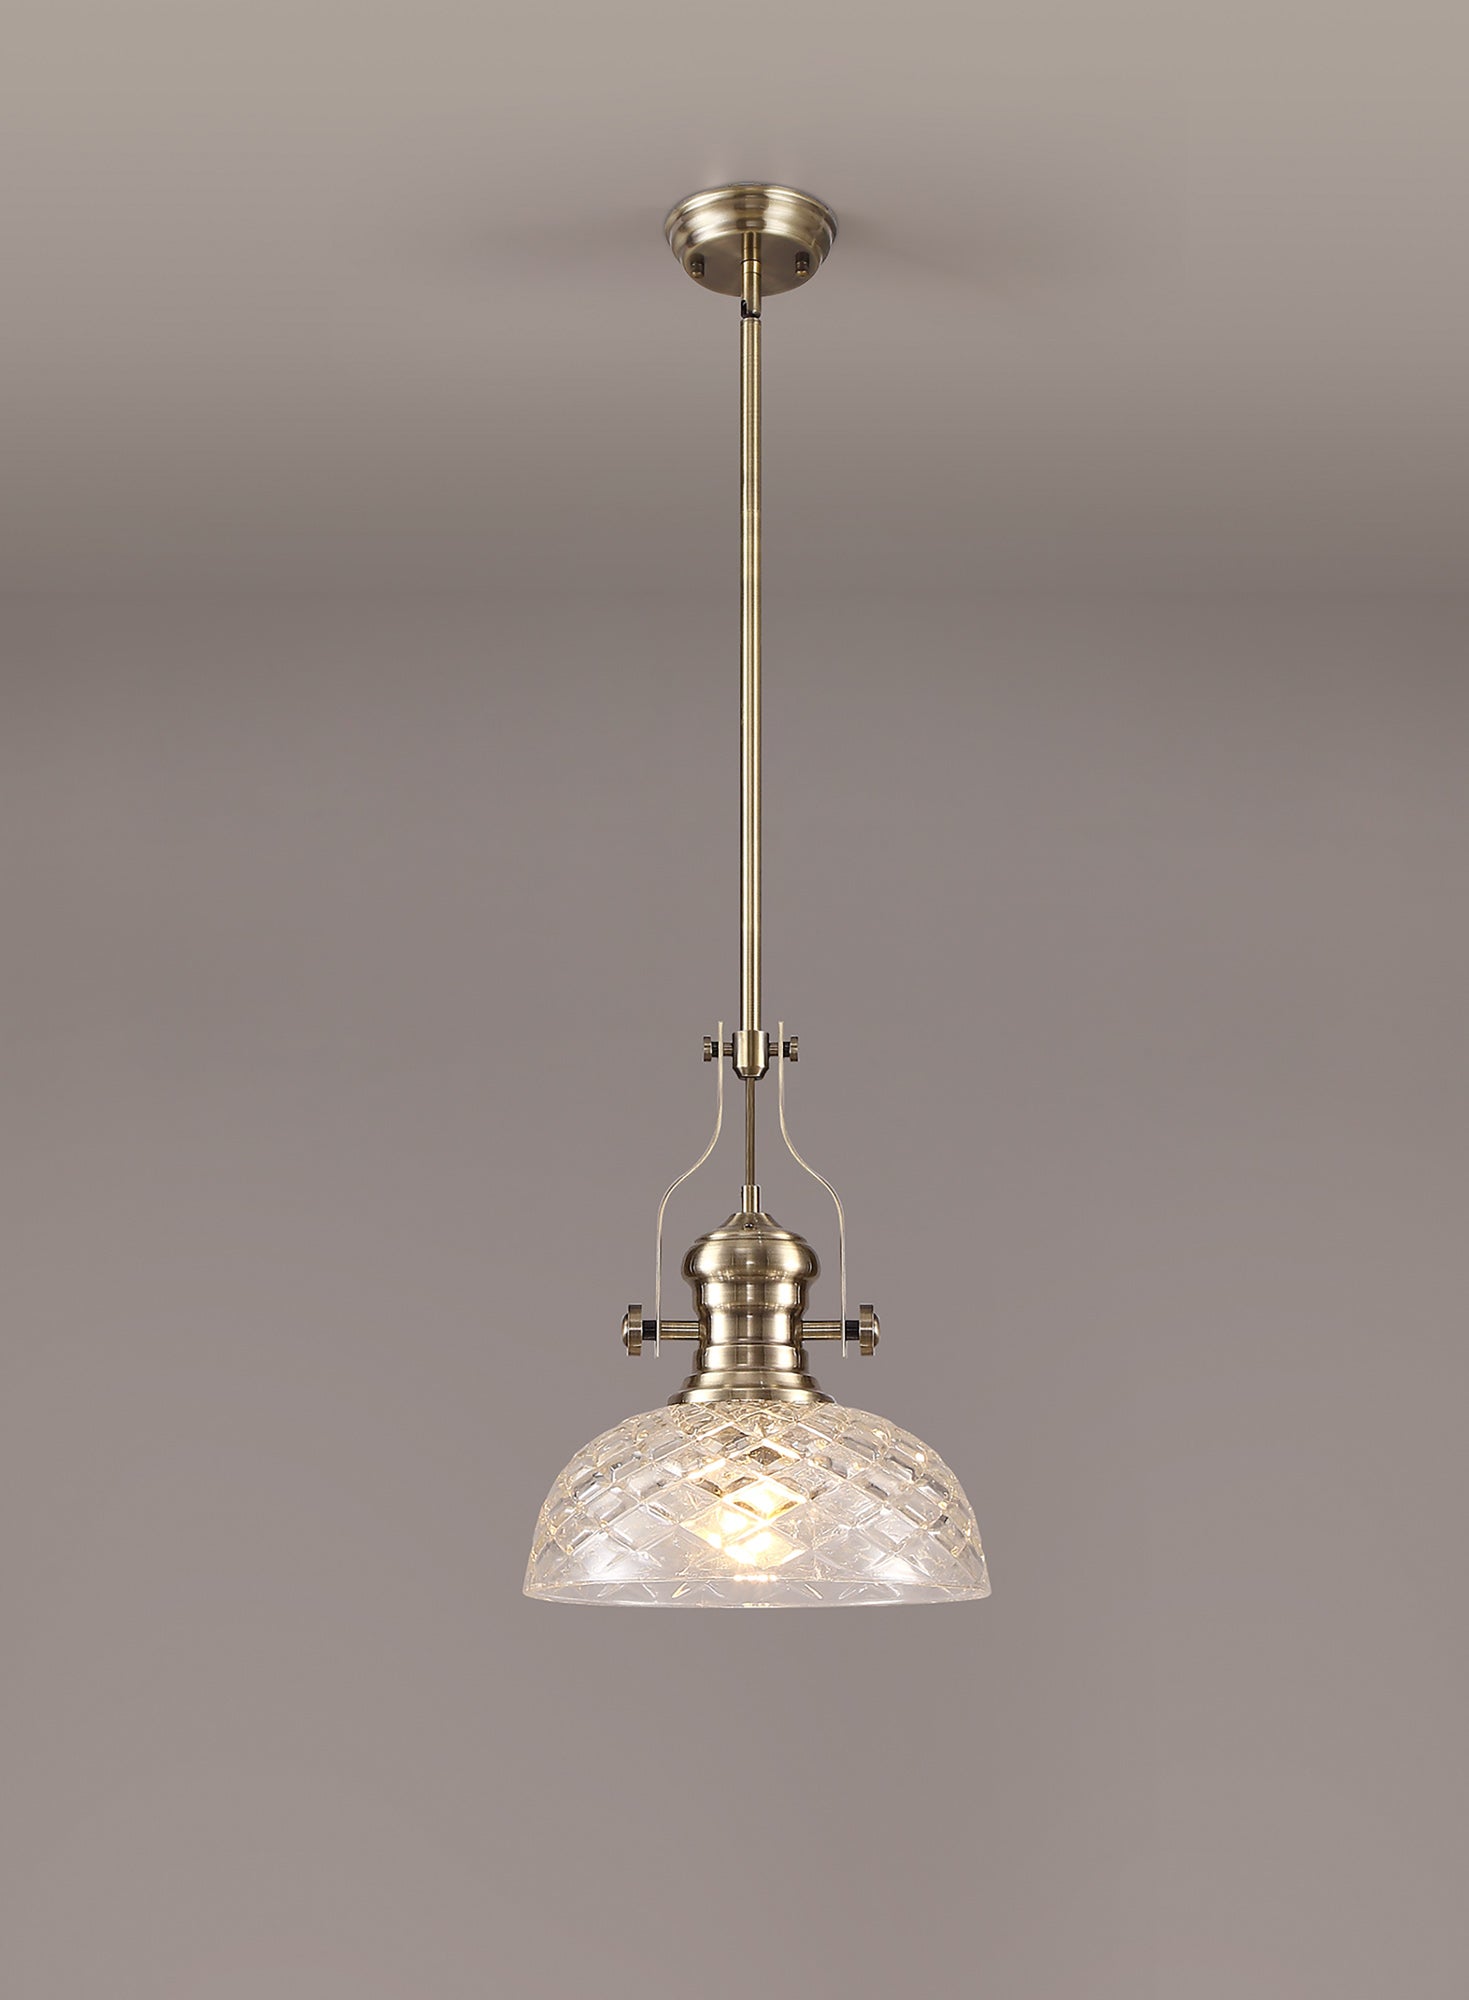 Docker Pendant With 30cm Flat Round Patterned Shade, 1 x E27, Antique Brass/Clear Glass LOK104623